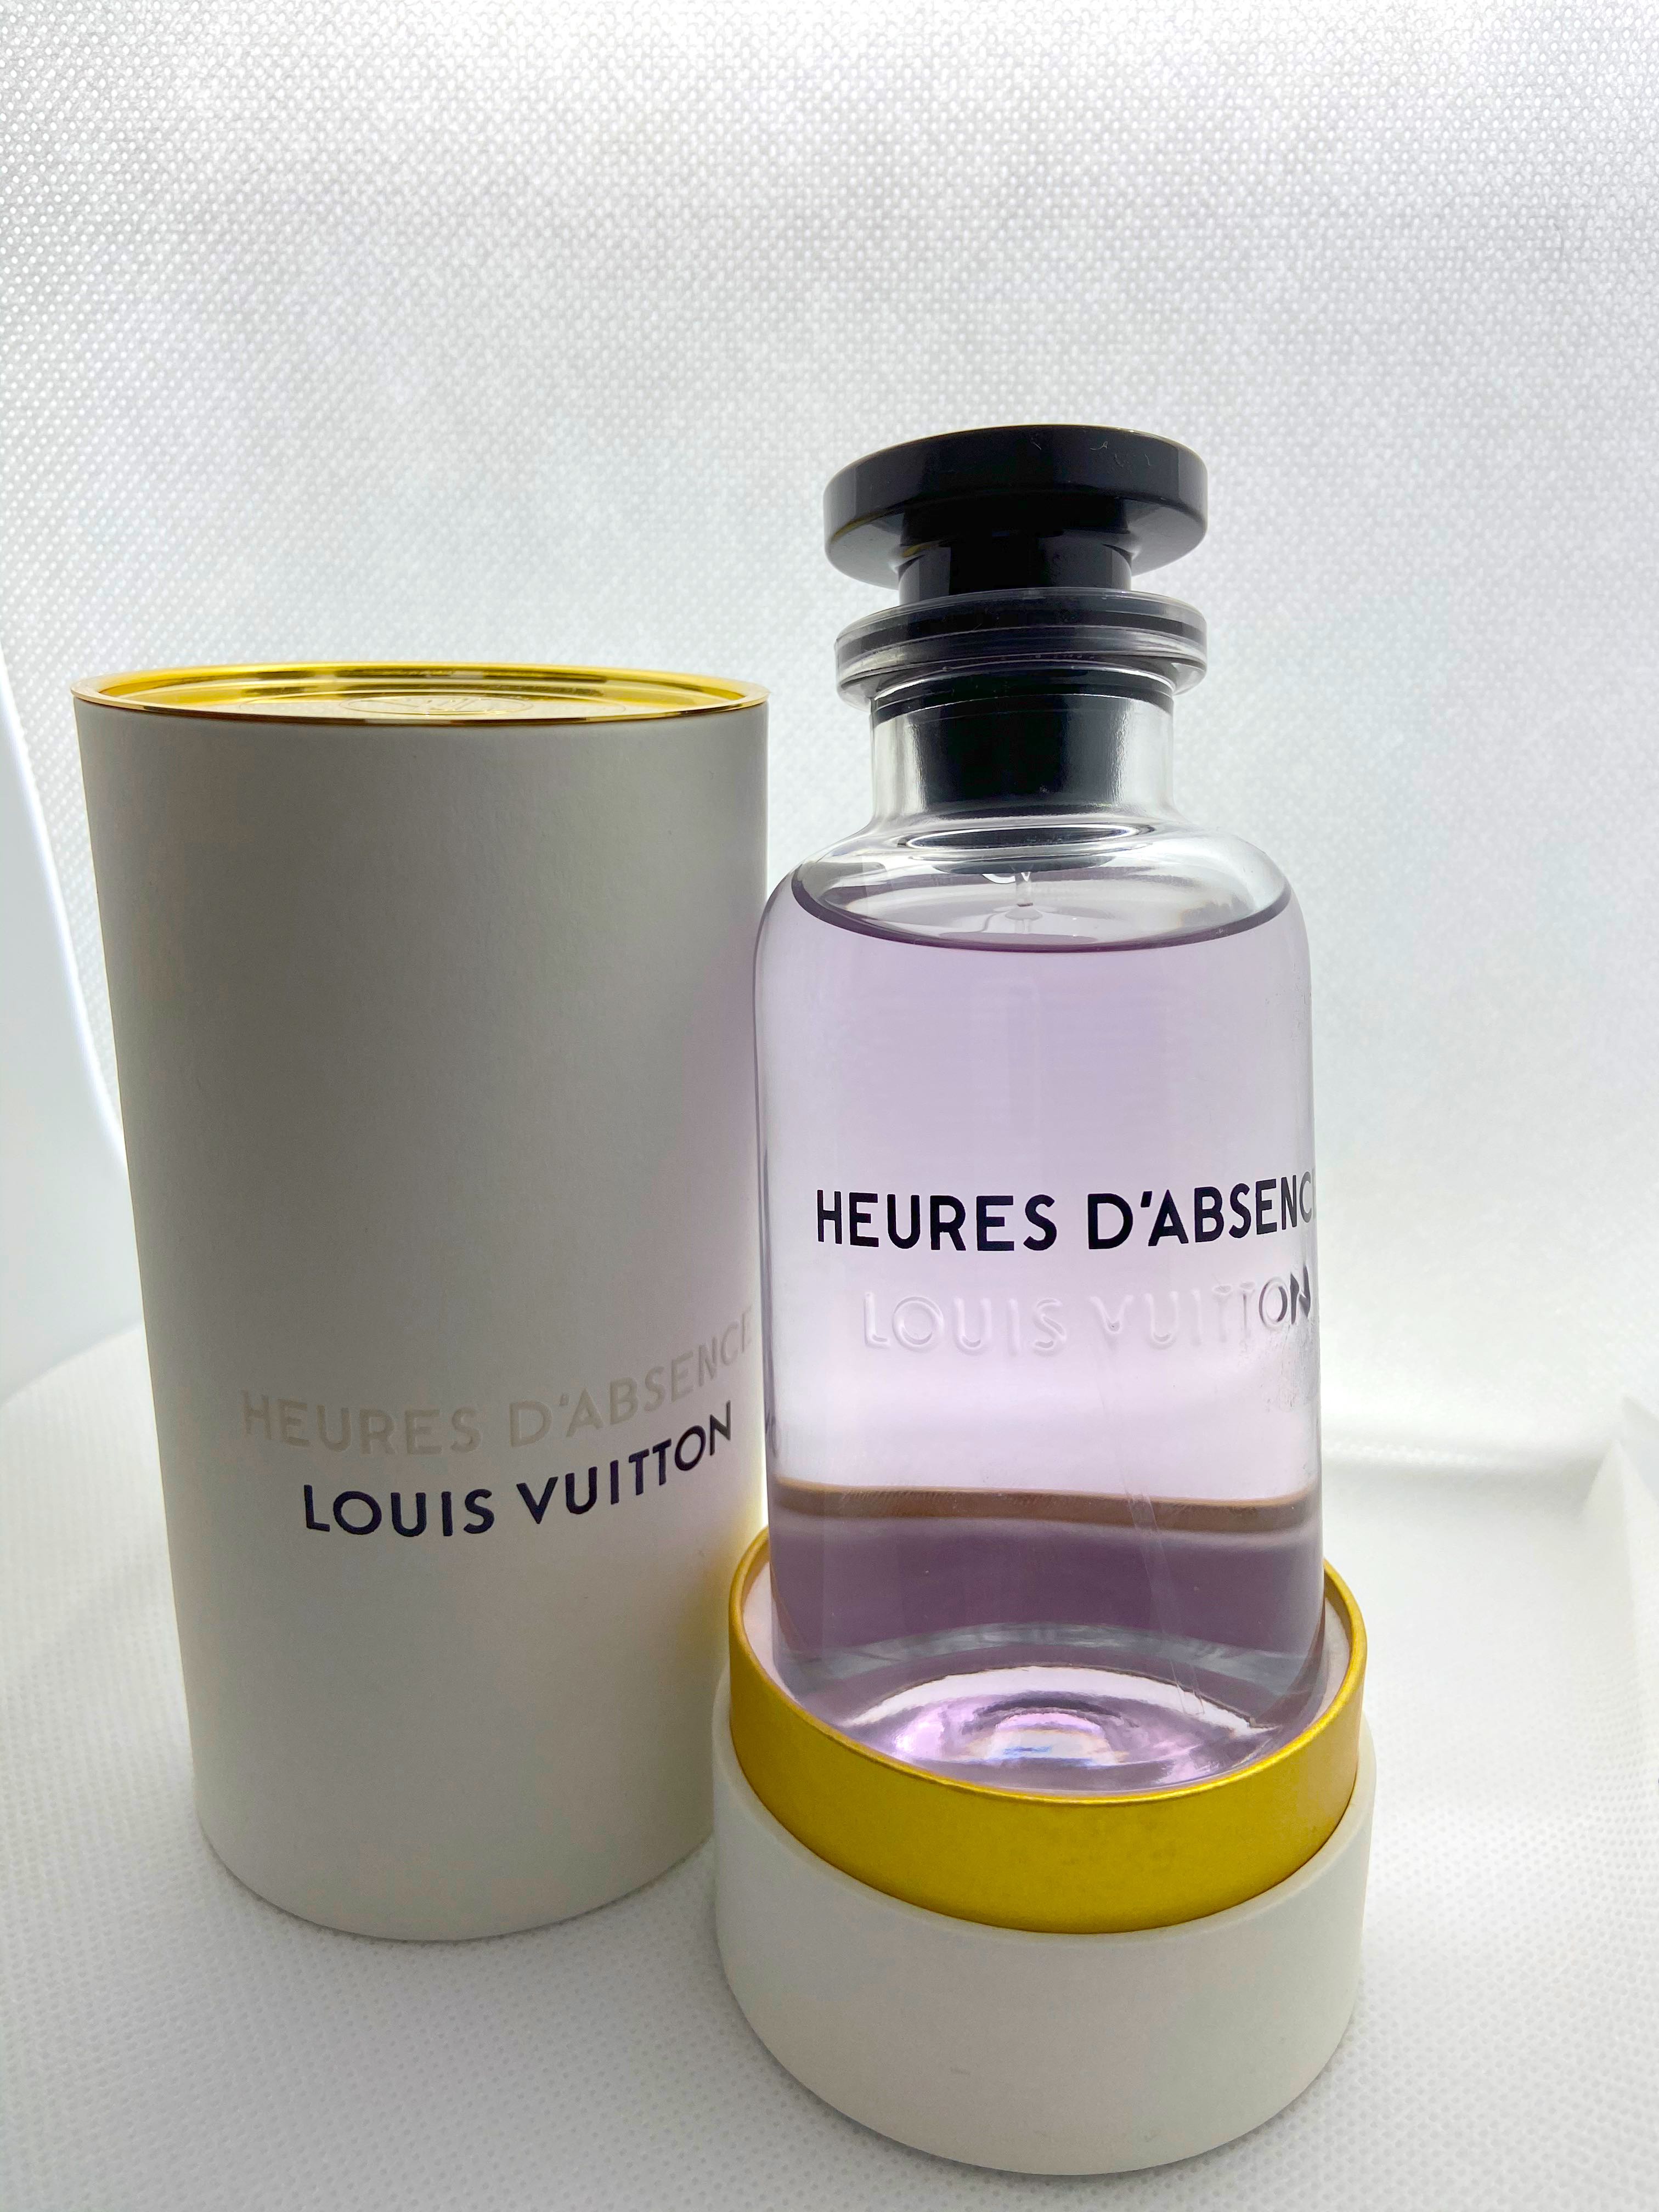 Heures d'Absence by Louis Vuitton